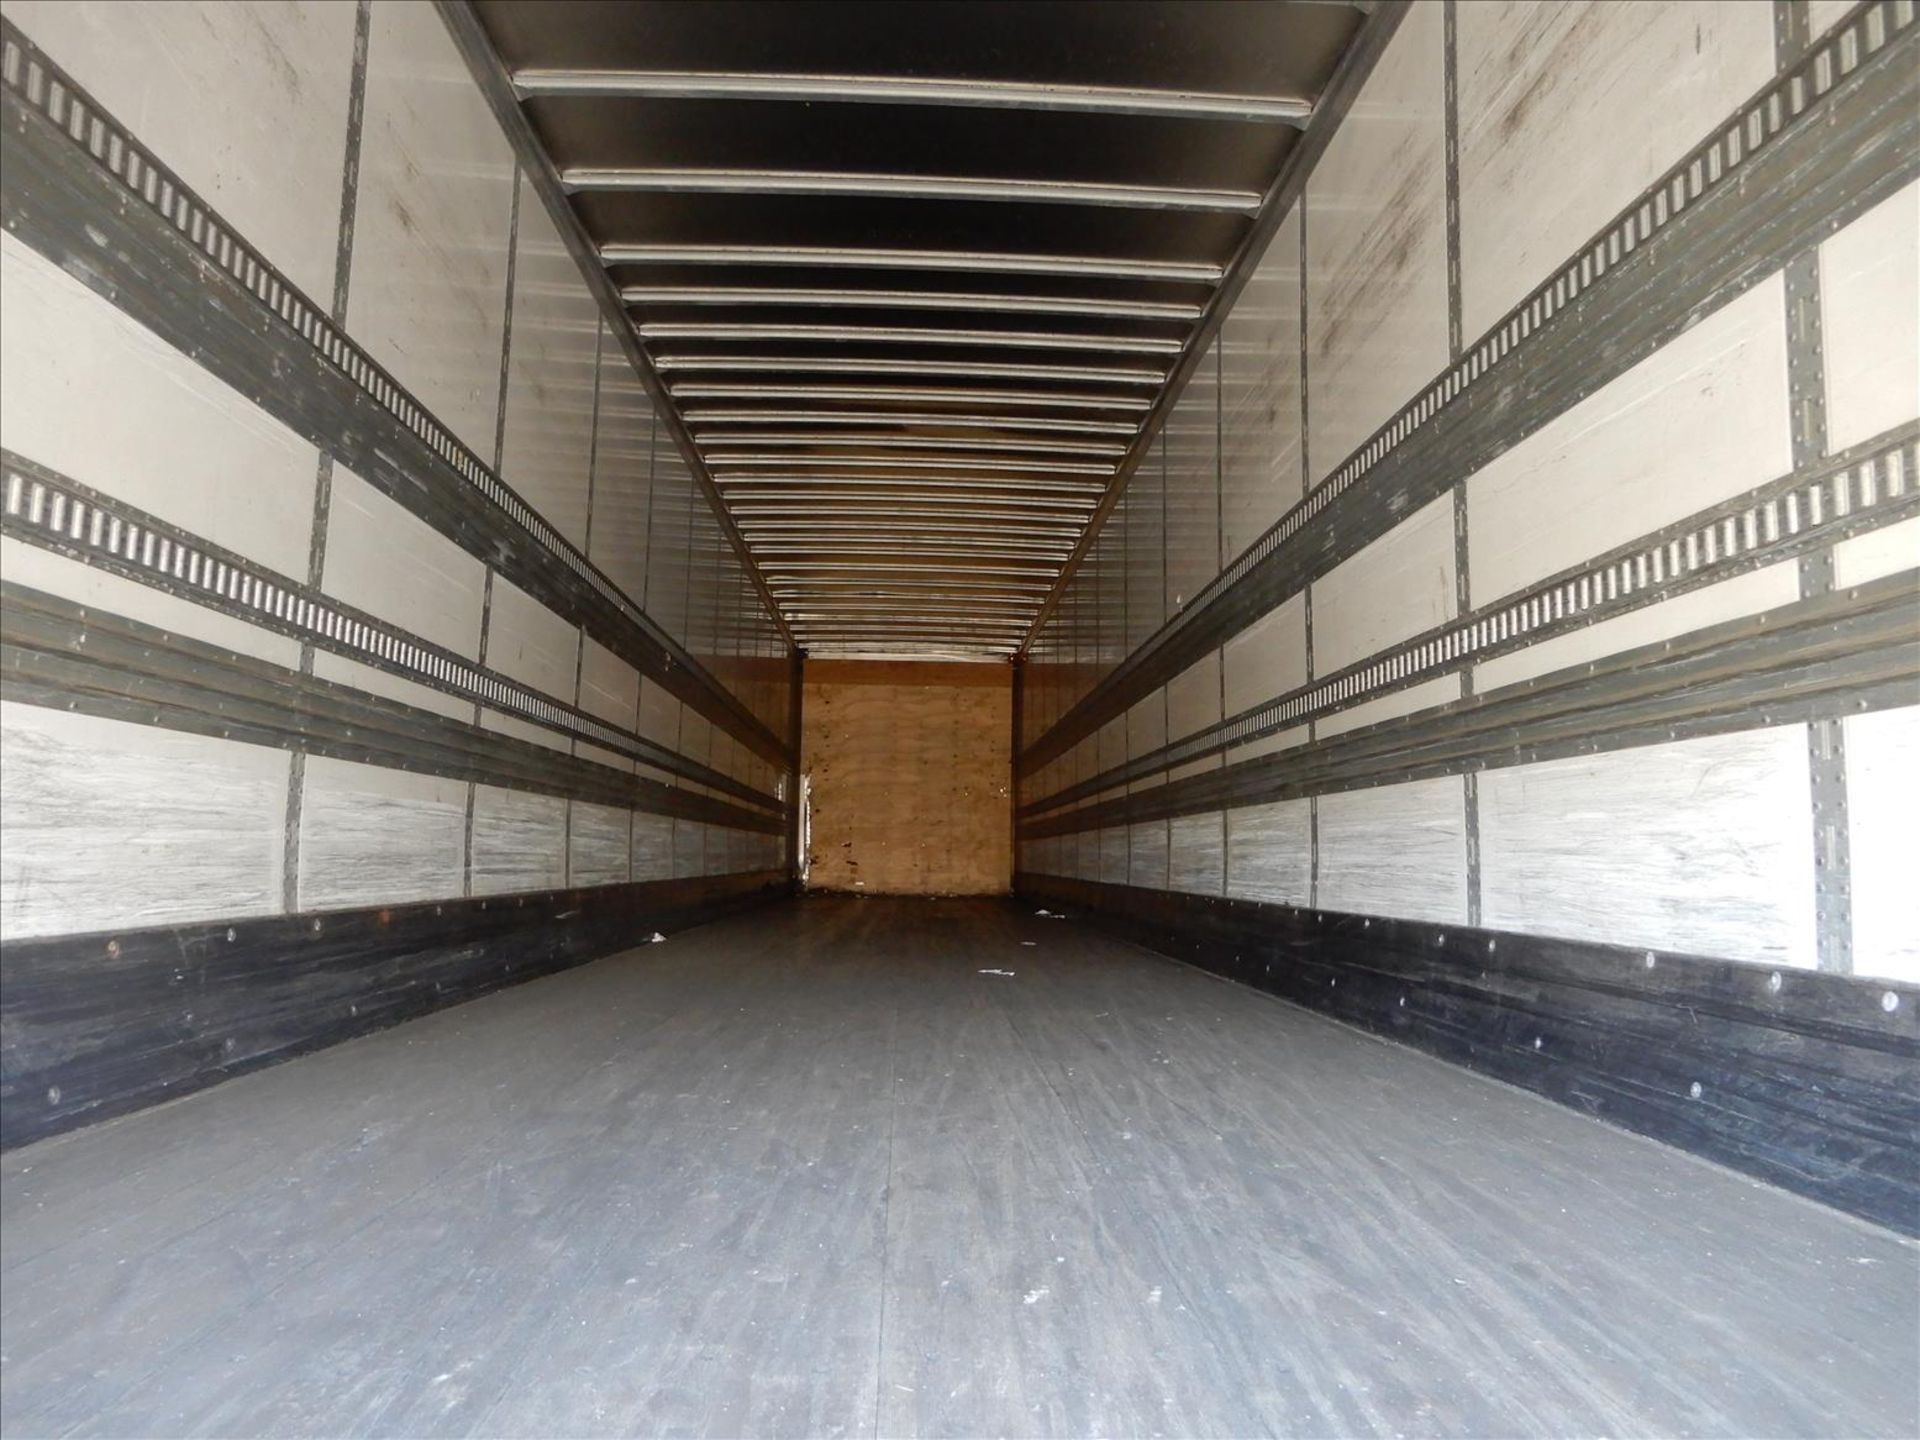 2012 Stoughton Trailer - Located in Indianapolis, IN - Image 21 of 32